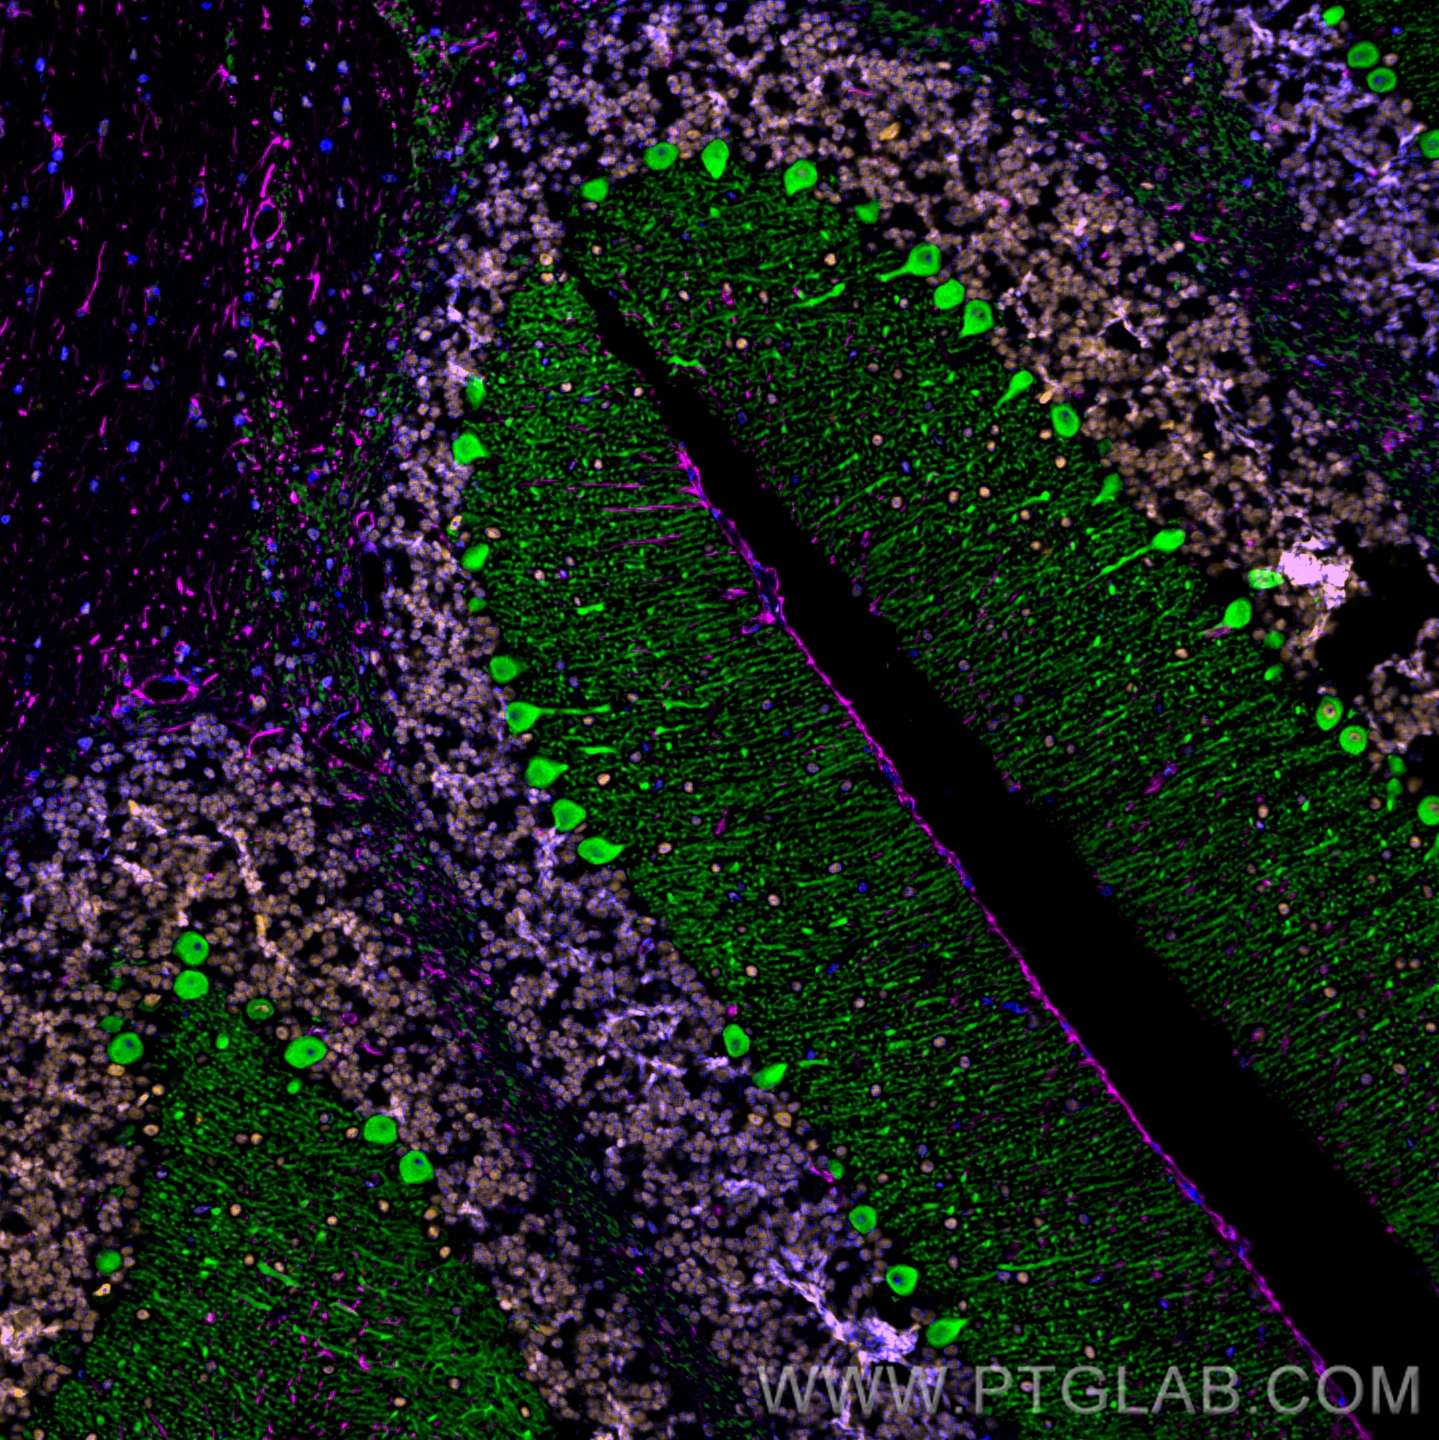 Immunofluorescence of mouse cerebellum: FFPE mouse cerebellum sections were stained with anti-Calbindin antibody (14479-1-AP, green) labeled with FlexAble HRP Antibody Labeling Kit for Rabbit IgG (KFA005) and Tyramide-488, anti-Fus antibody (68262-1-Ig, orange) labeled with FlexAble HRP Antibody Labeling Kit for Mouse IgG1 (KFA025) and Tyramide-555, and anti-GFAP antibody (60190-1-Ig, magenta) labeled with FlexAble HRP Antibody Labeling Kit for Mouse IgG2a (KFA045) and Tyramide-650. Cell nuclei are in blue. 